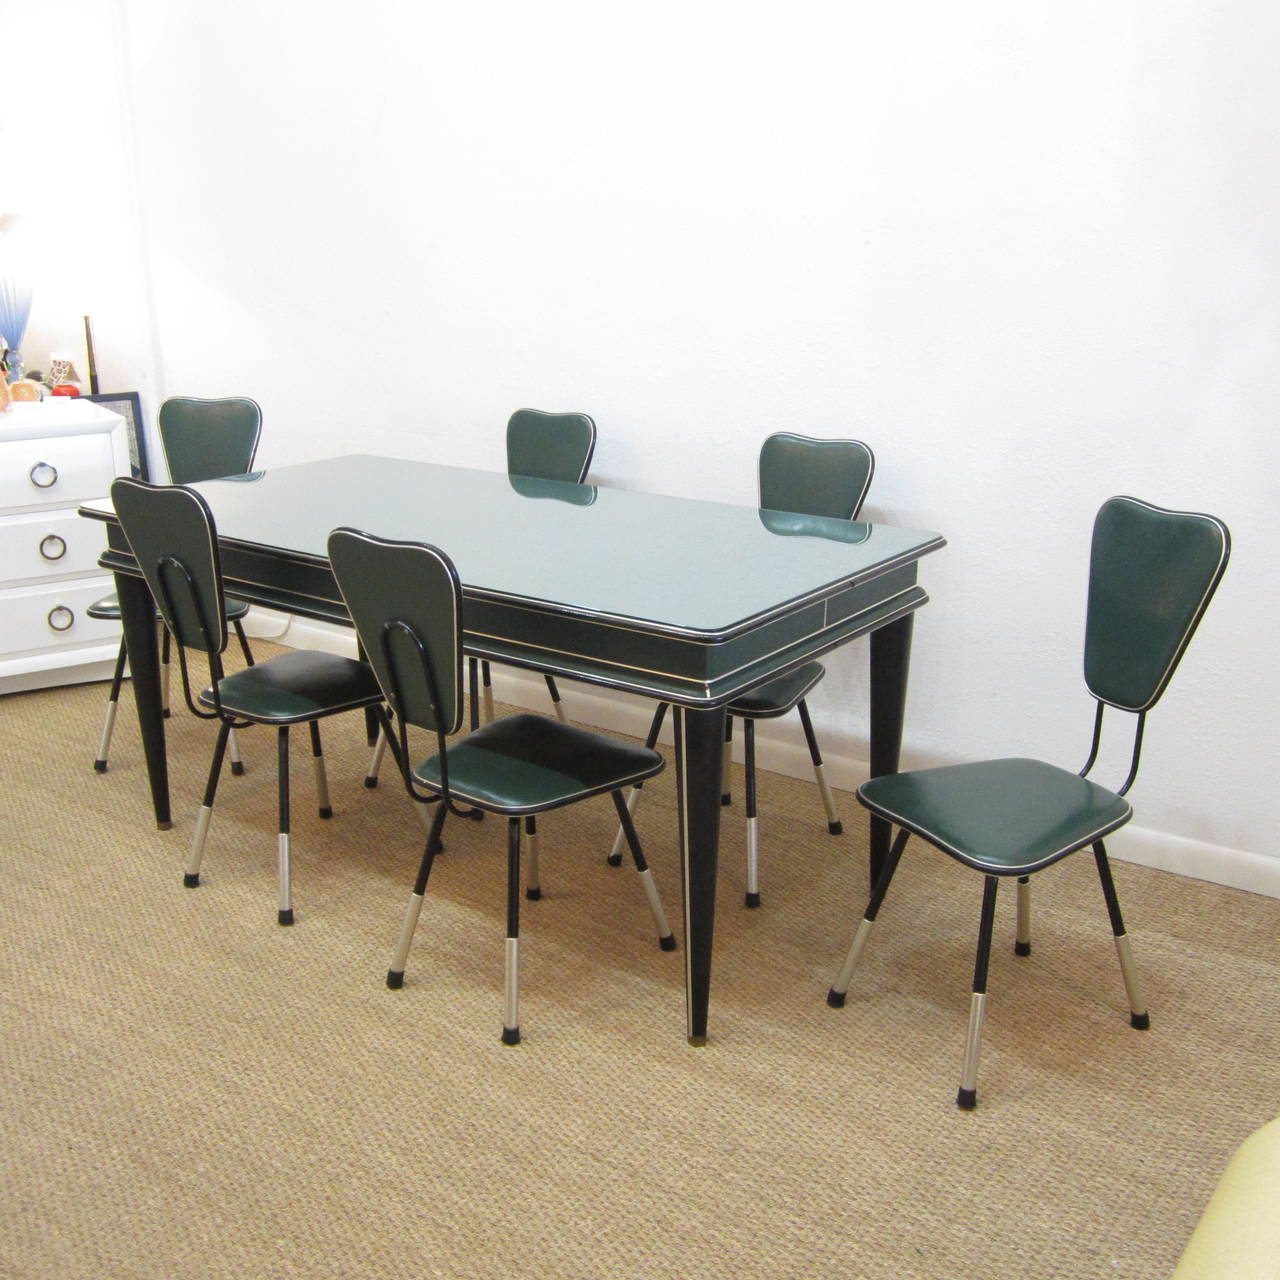 Fantastic dining table covered in green pebbled vinyl with coordinating black pebbled vinyl tapered legs all with aluminum trim. The tabletop has removable glass top and the legs taper to a thin point.
The matching chairs are in green and black